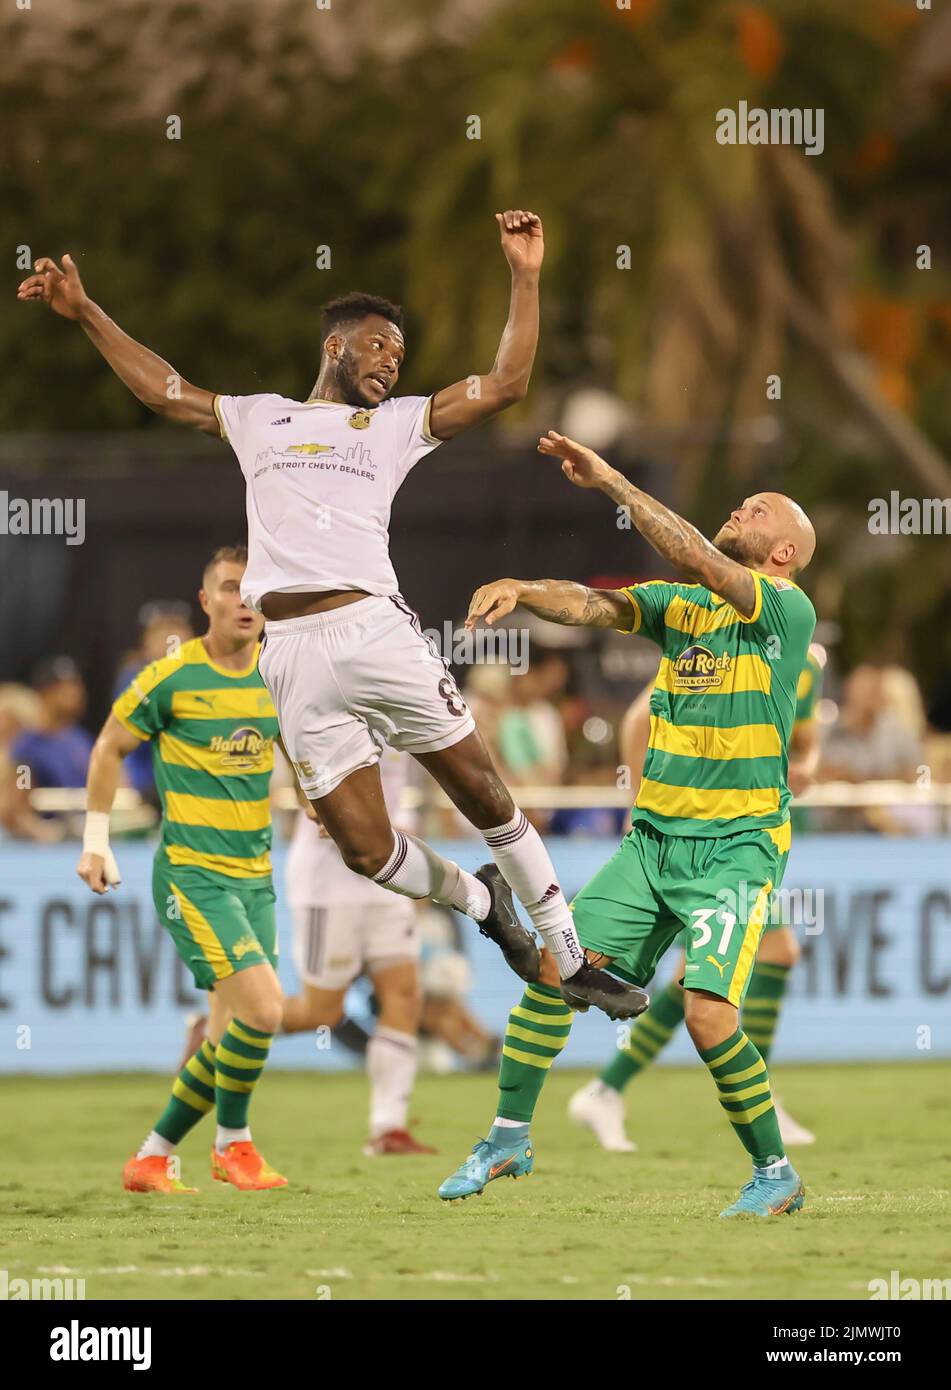 St. Petersburg, FL: Detroit midfielder Abdoulaye Diop (8) and Tampa Bay Rowdies midfielder Nicky Law (31) prepare to head the ball again during a USL Stock Photo